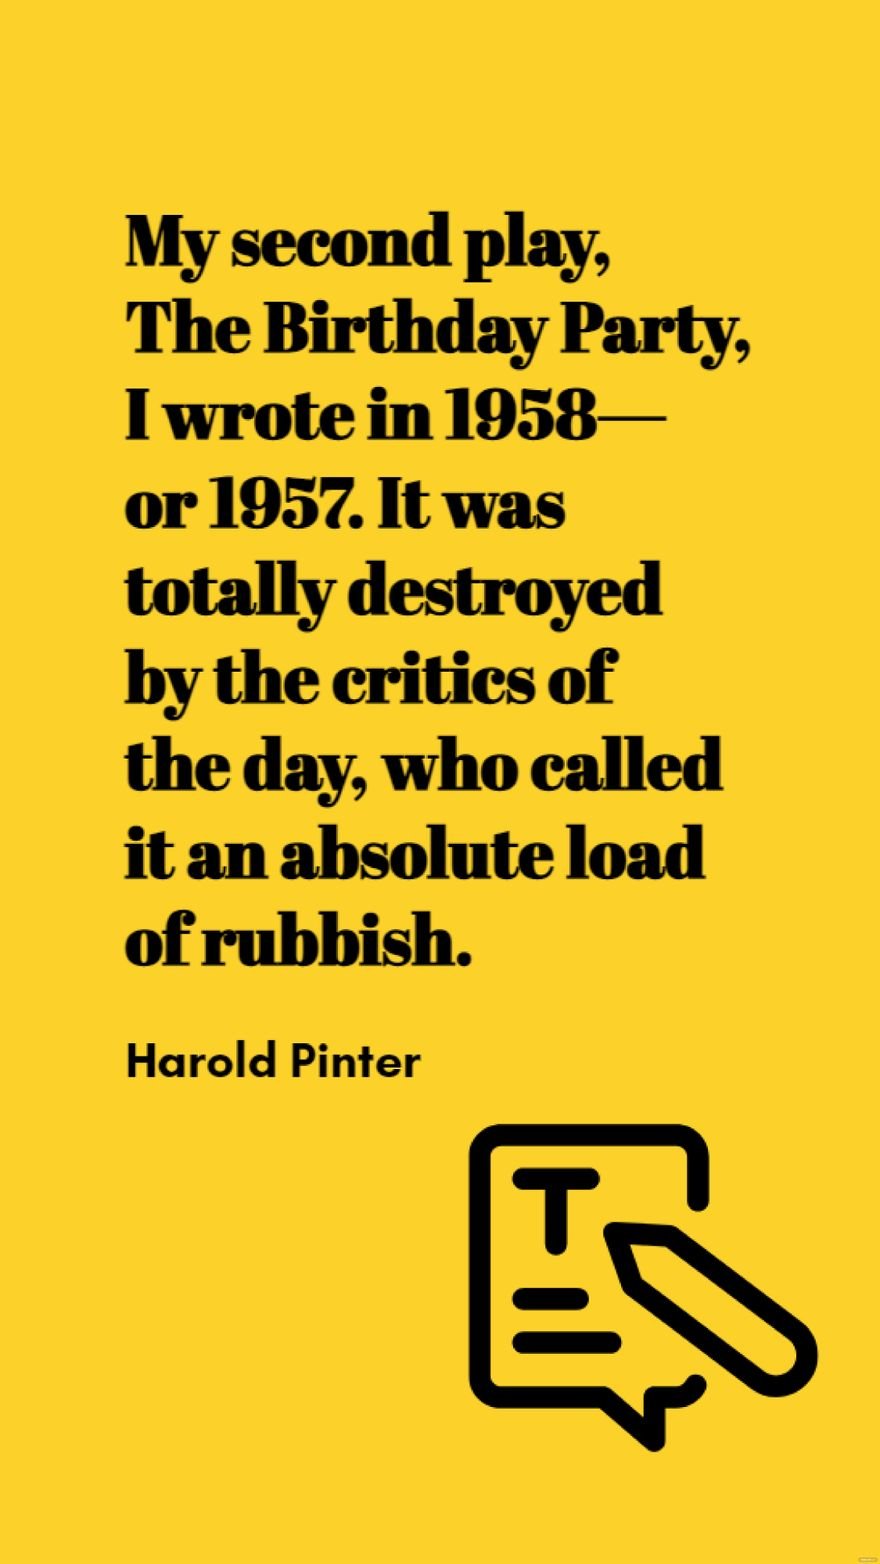 Free Harold Pinter - My second play, The Birthday Party, I wrote in 1958 - or 1957. It was totally destroyed by the critics of the day, who called it an absolute load of rubbish.